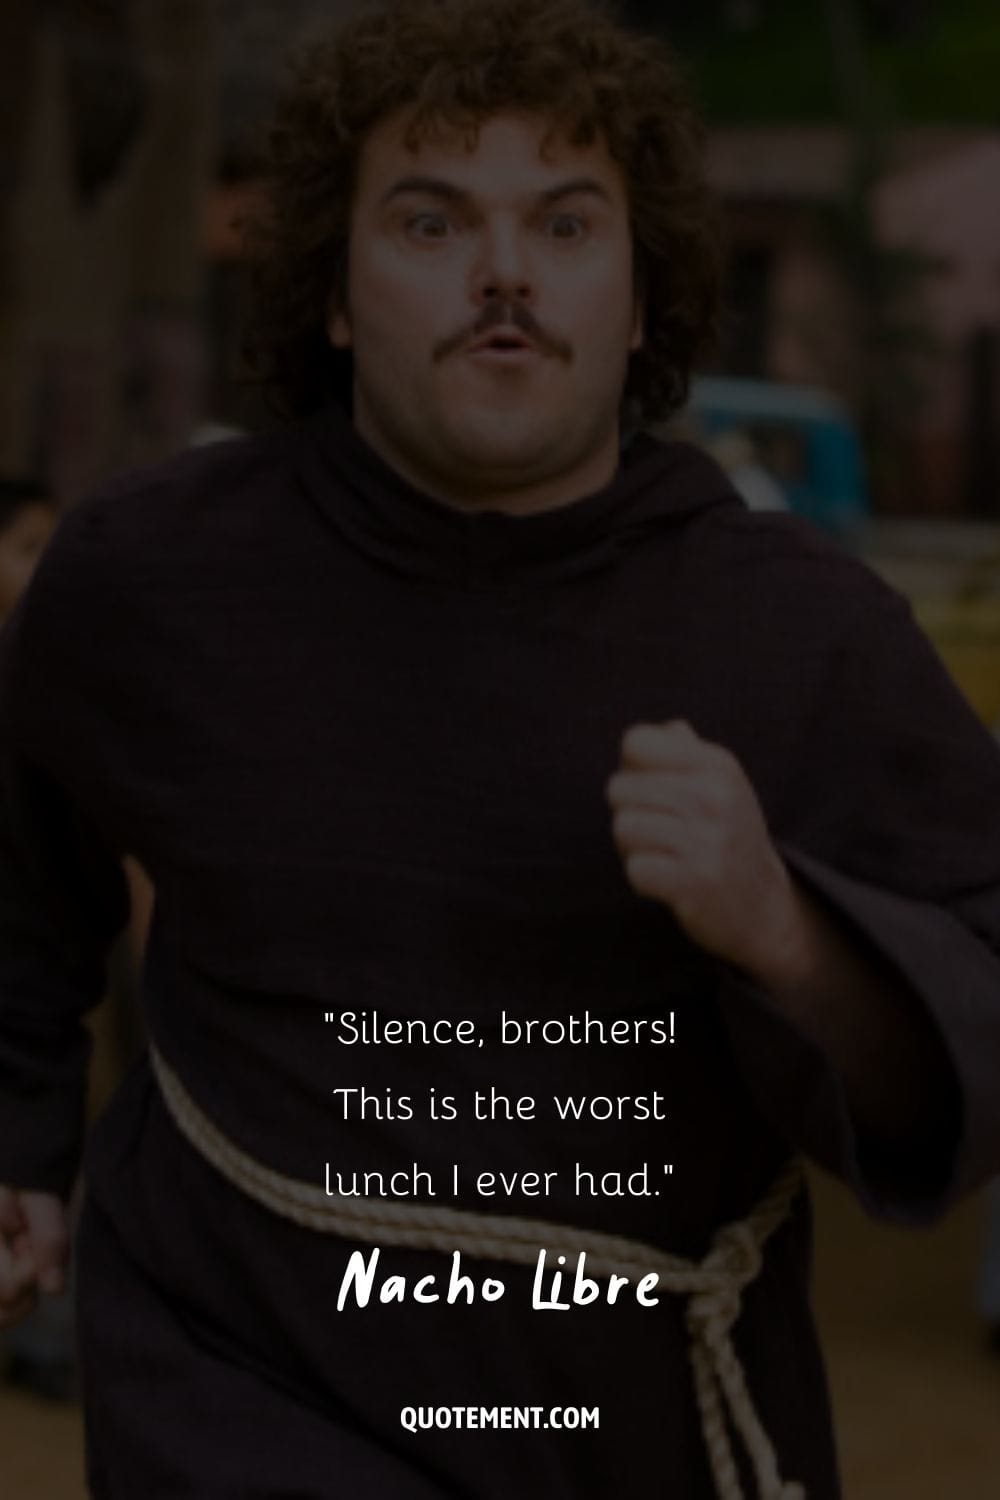 Silence, brothers! This is the worst lunch I ever had.